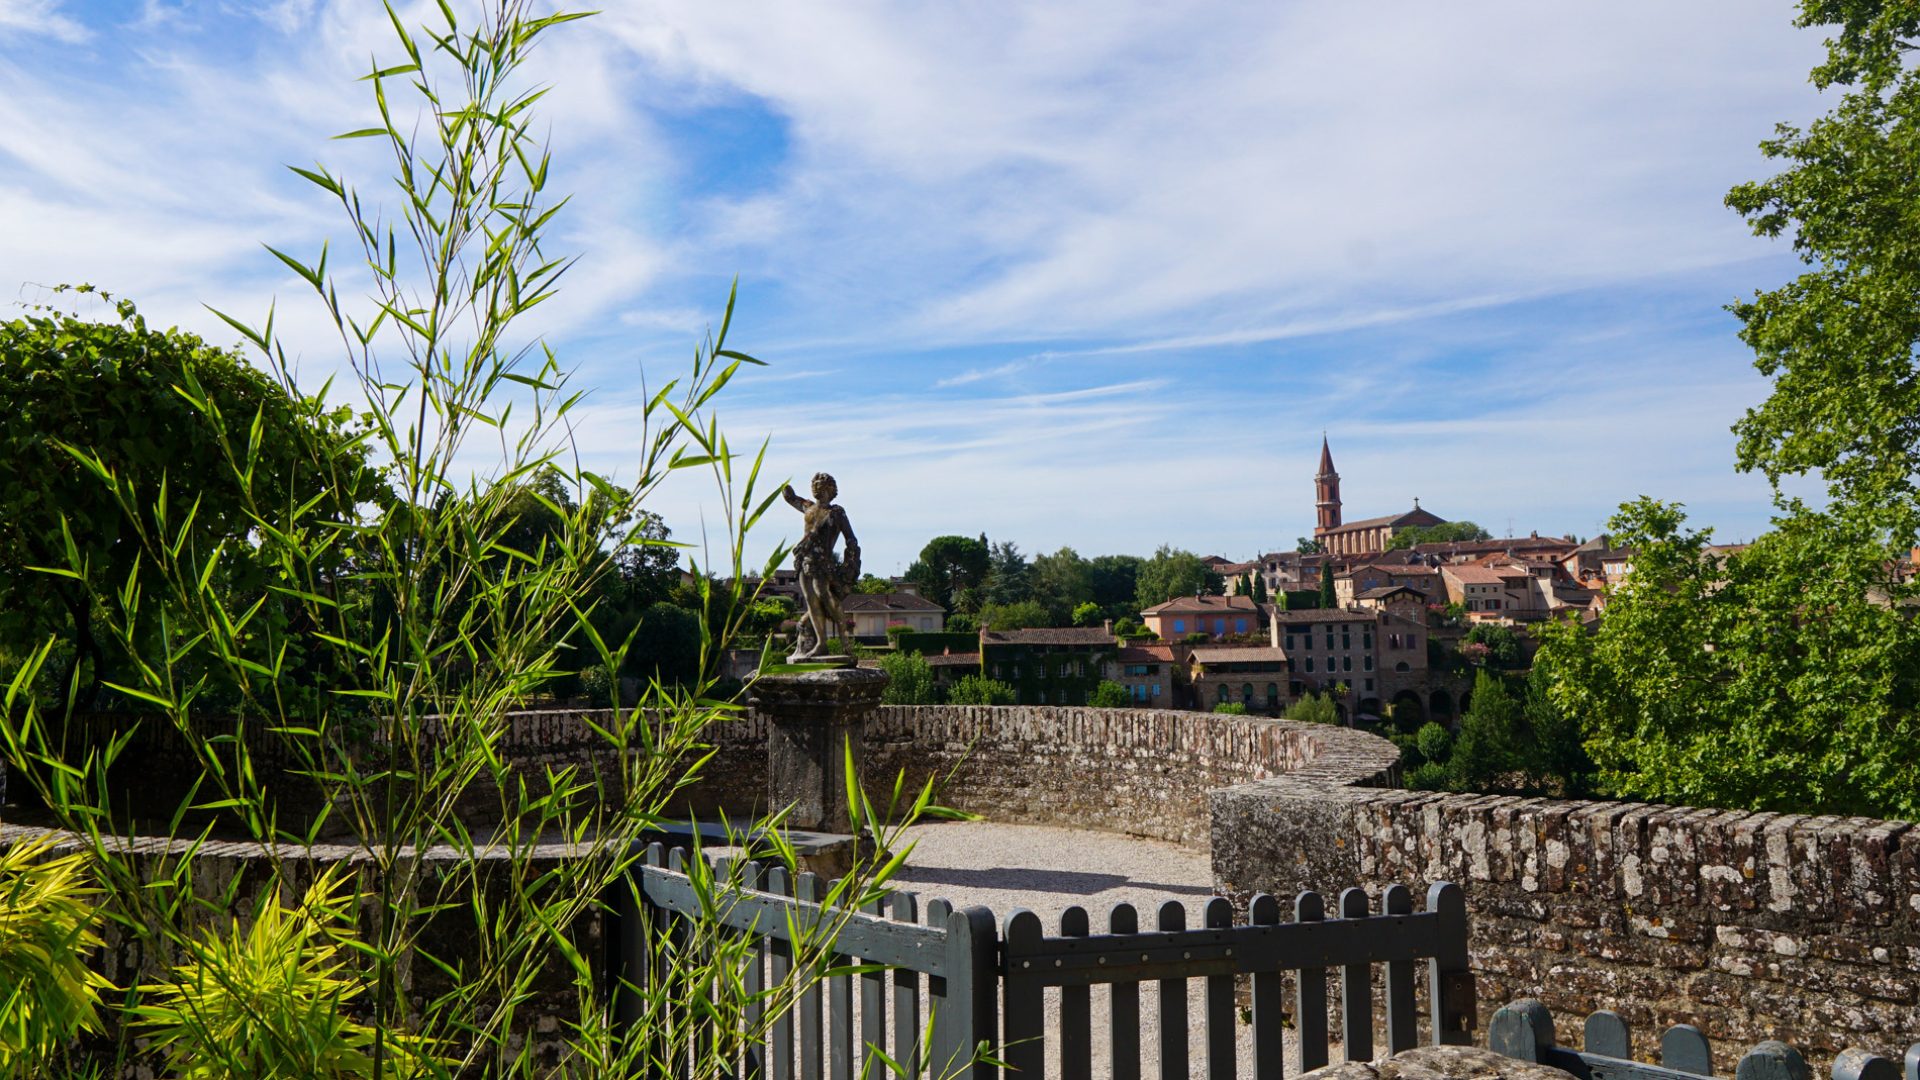 Coming to Albi, a getaway 1 hour from Toulouse